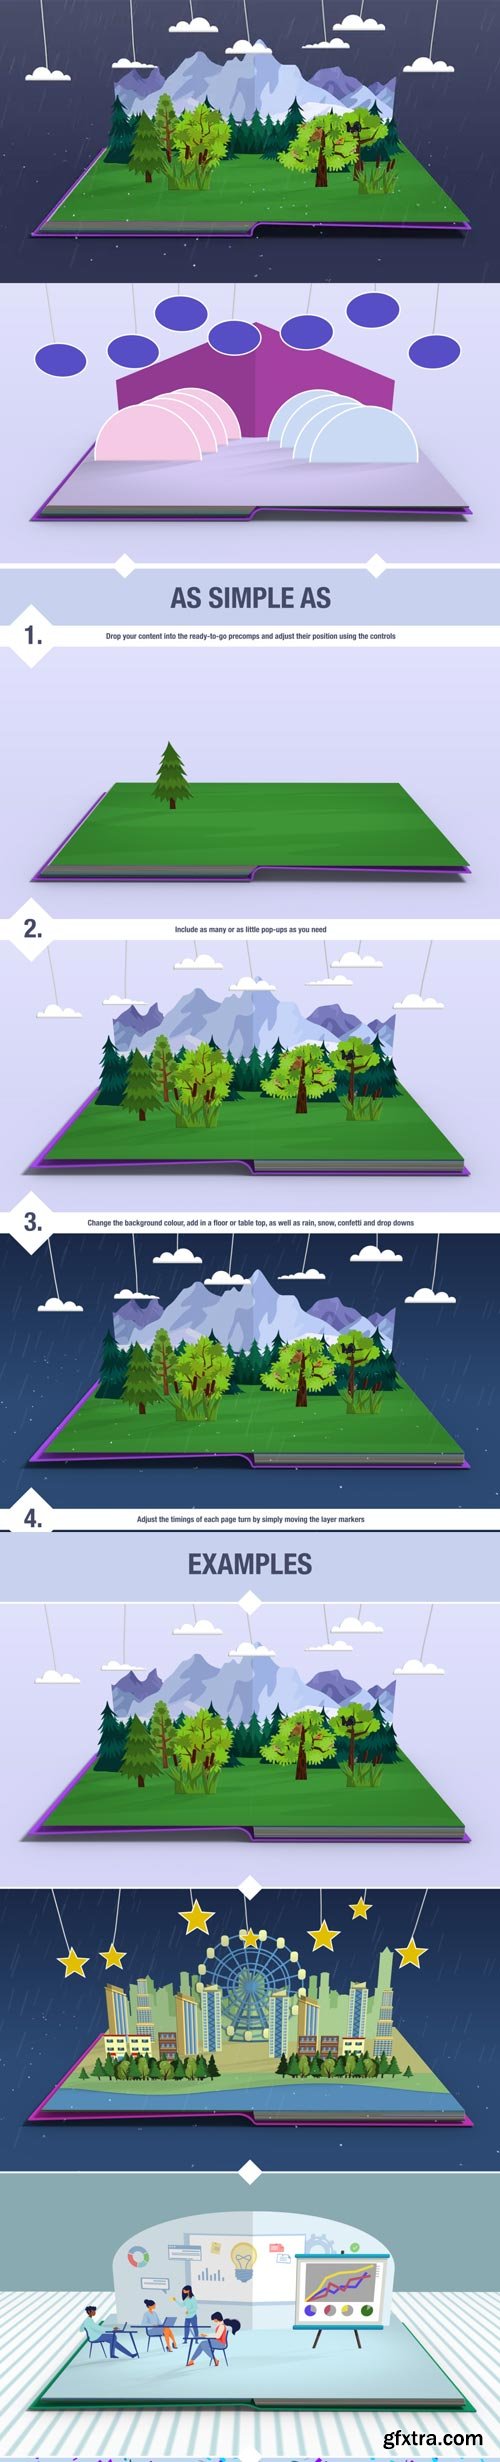 Videohive Pop Up Book Template 27902497 GFxtra